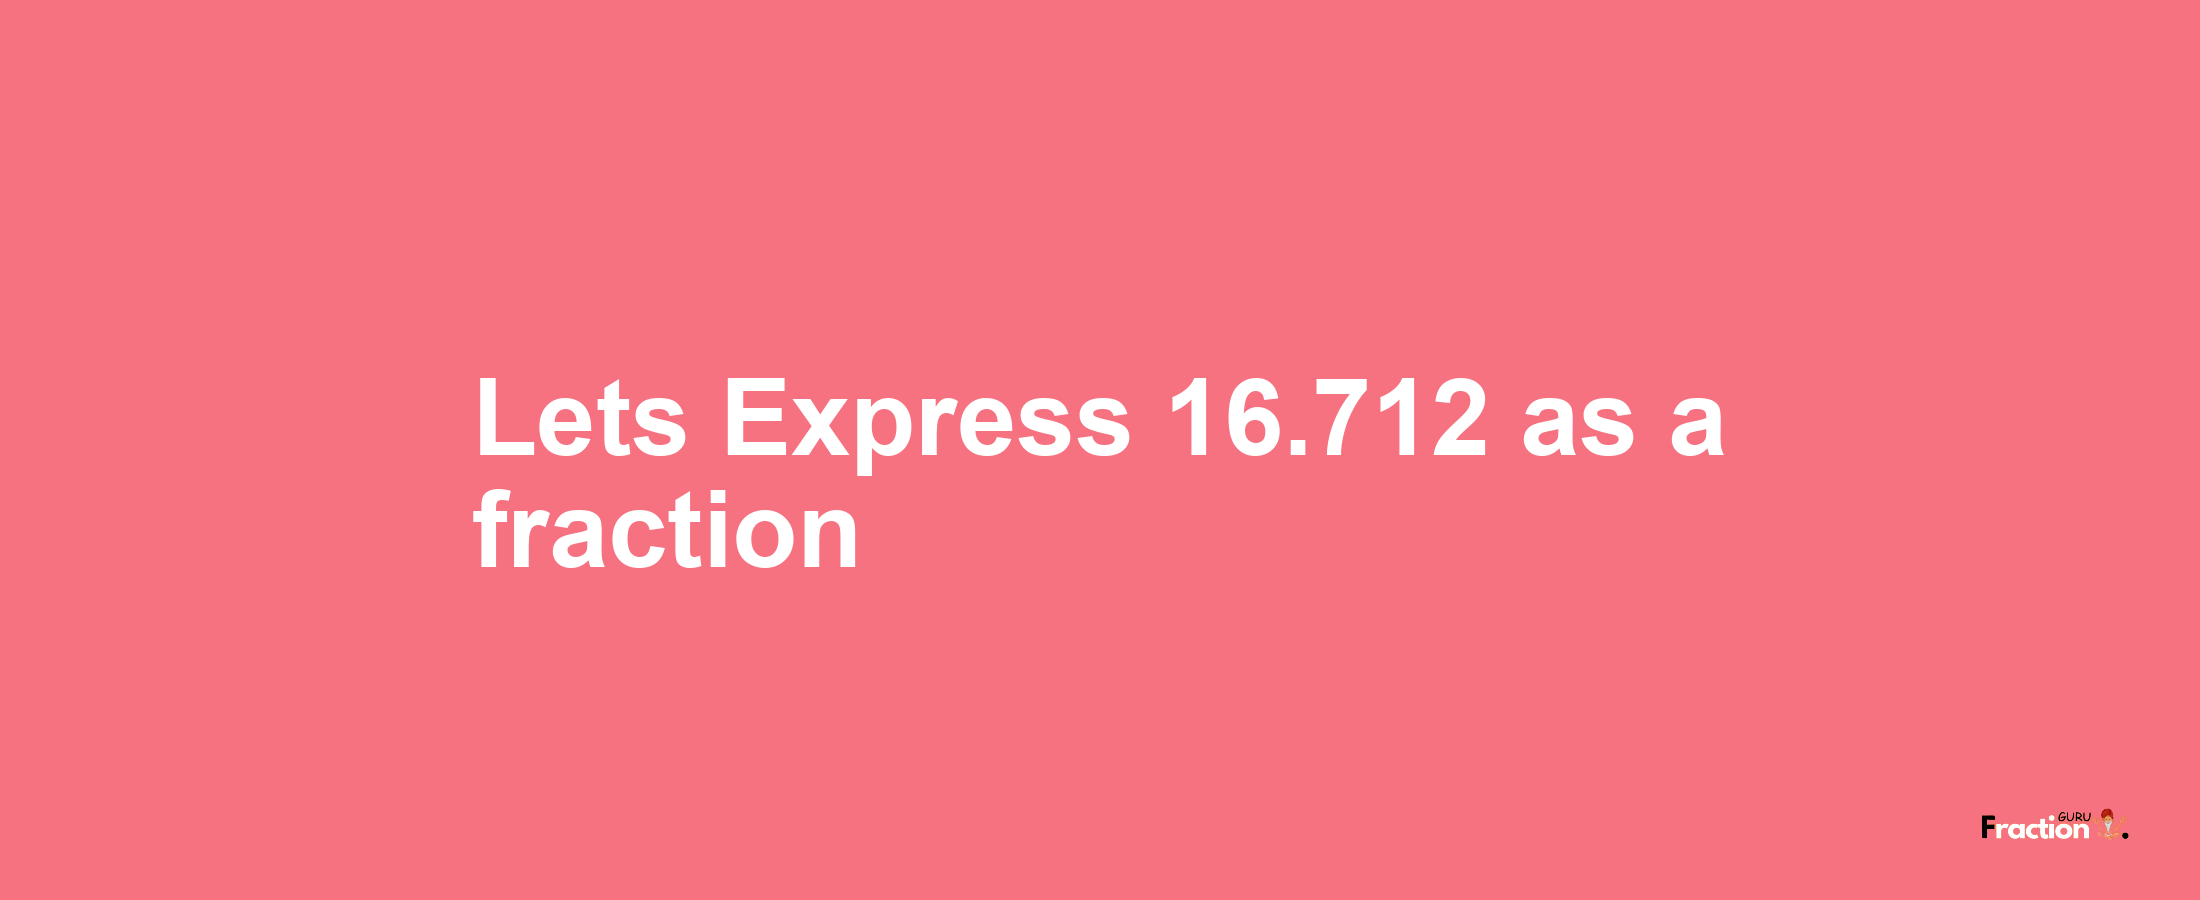 Lets Express 16.712 as afraction